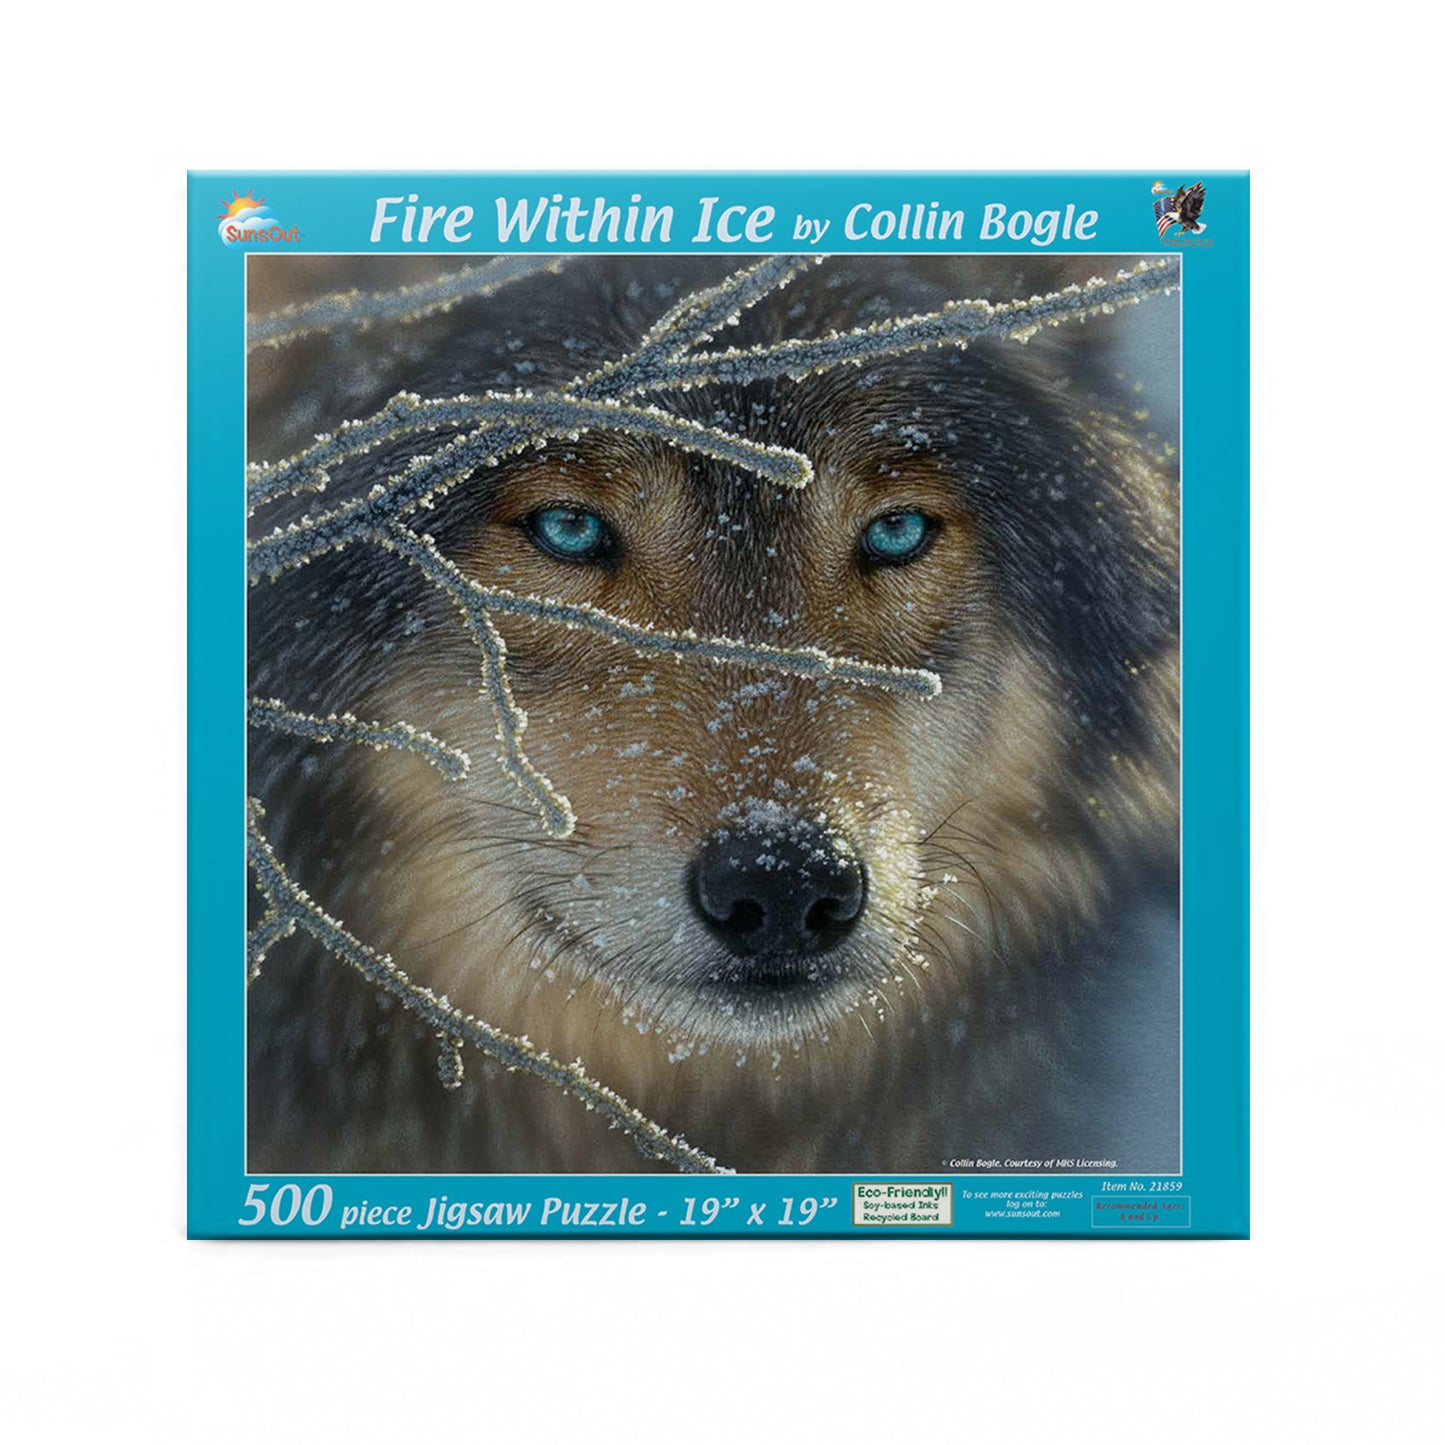 Fire Within Ice(16) - 500 Piece Jigsaw Puzzle